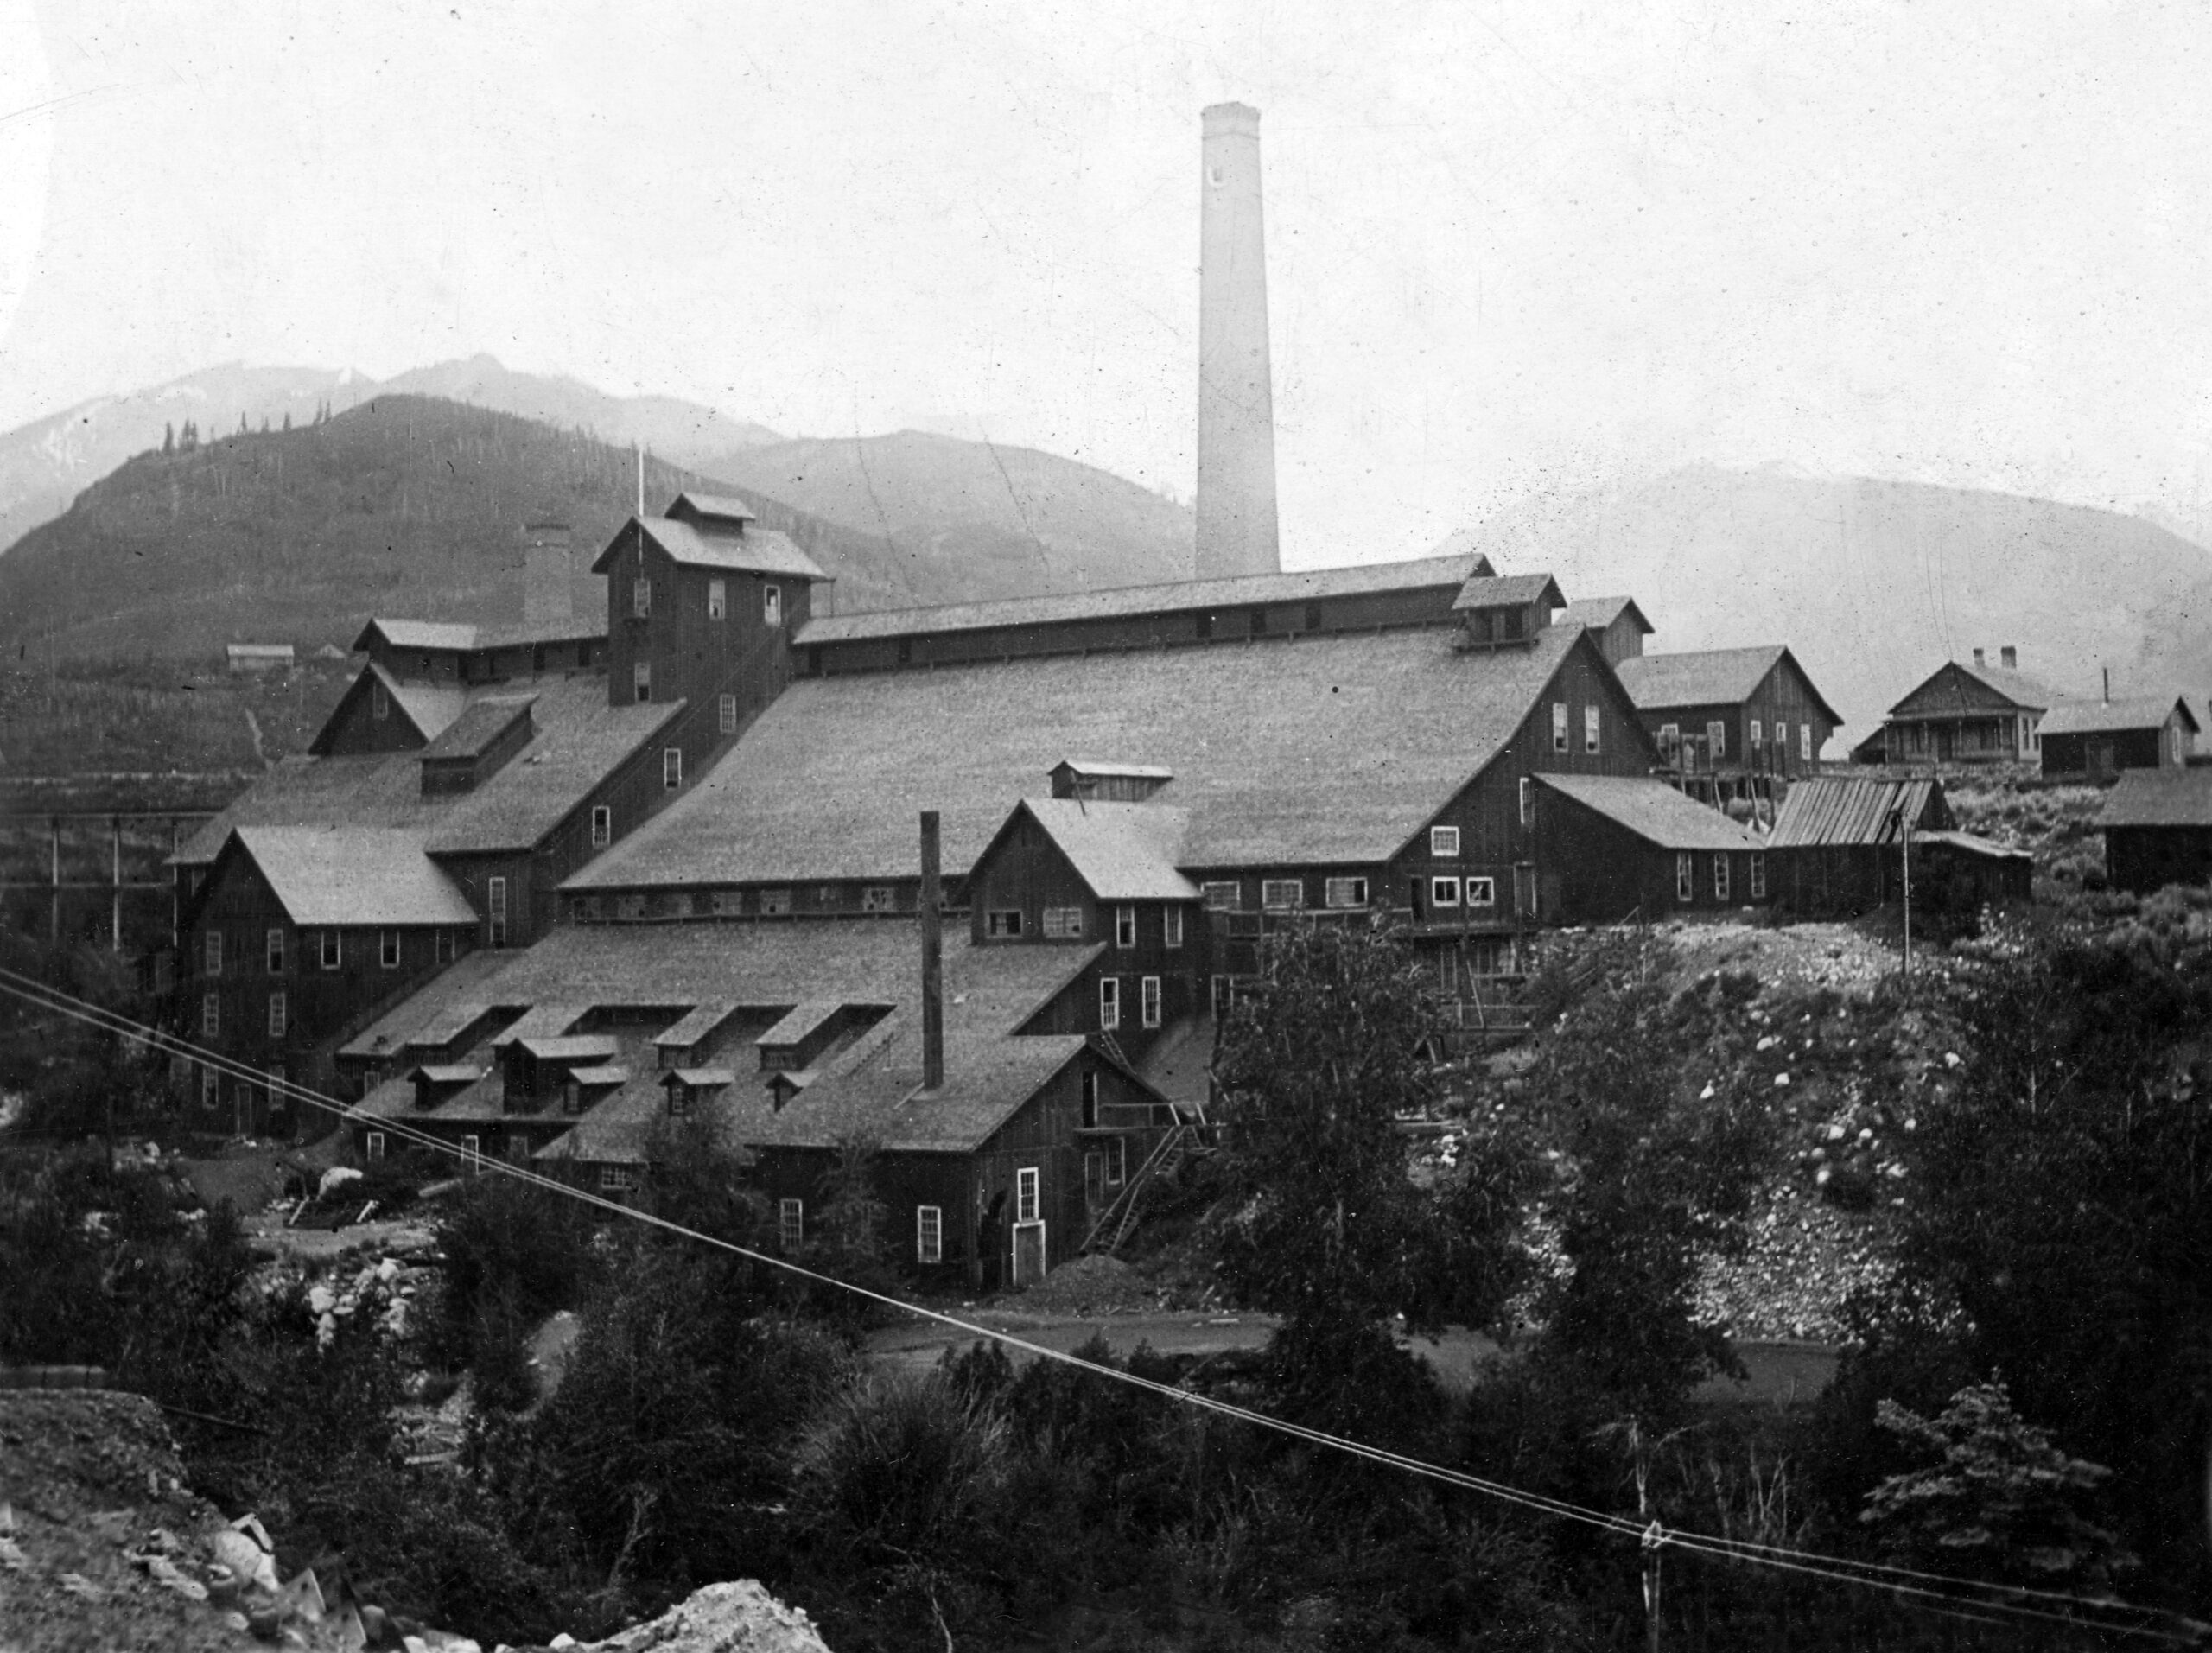 One b/w photograph of the Holden Lixiviation Plant, circa 1900.